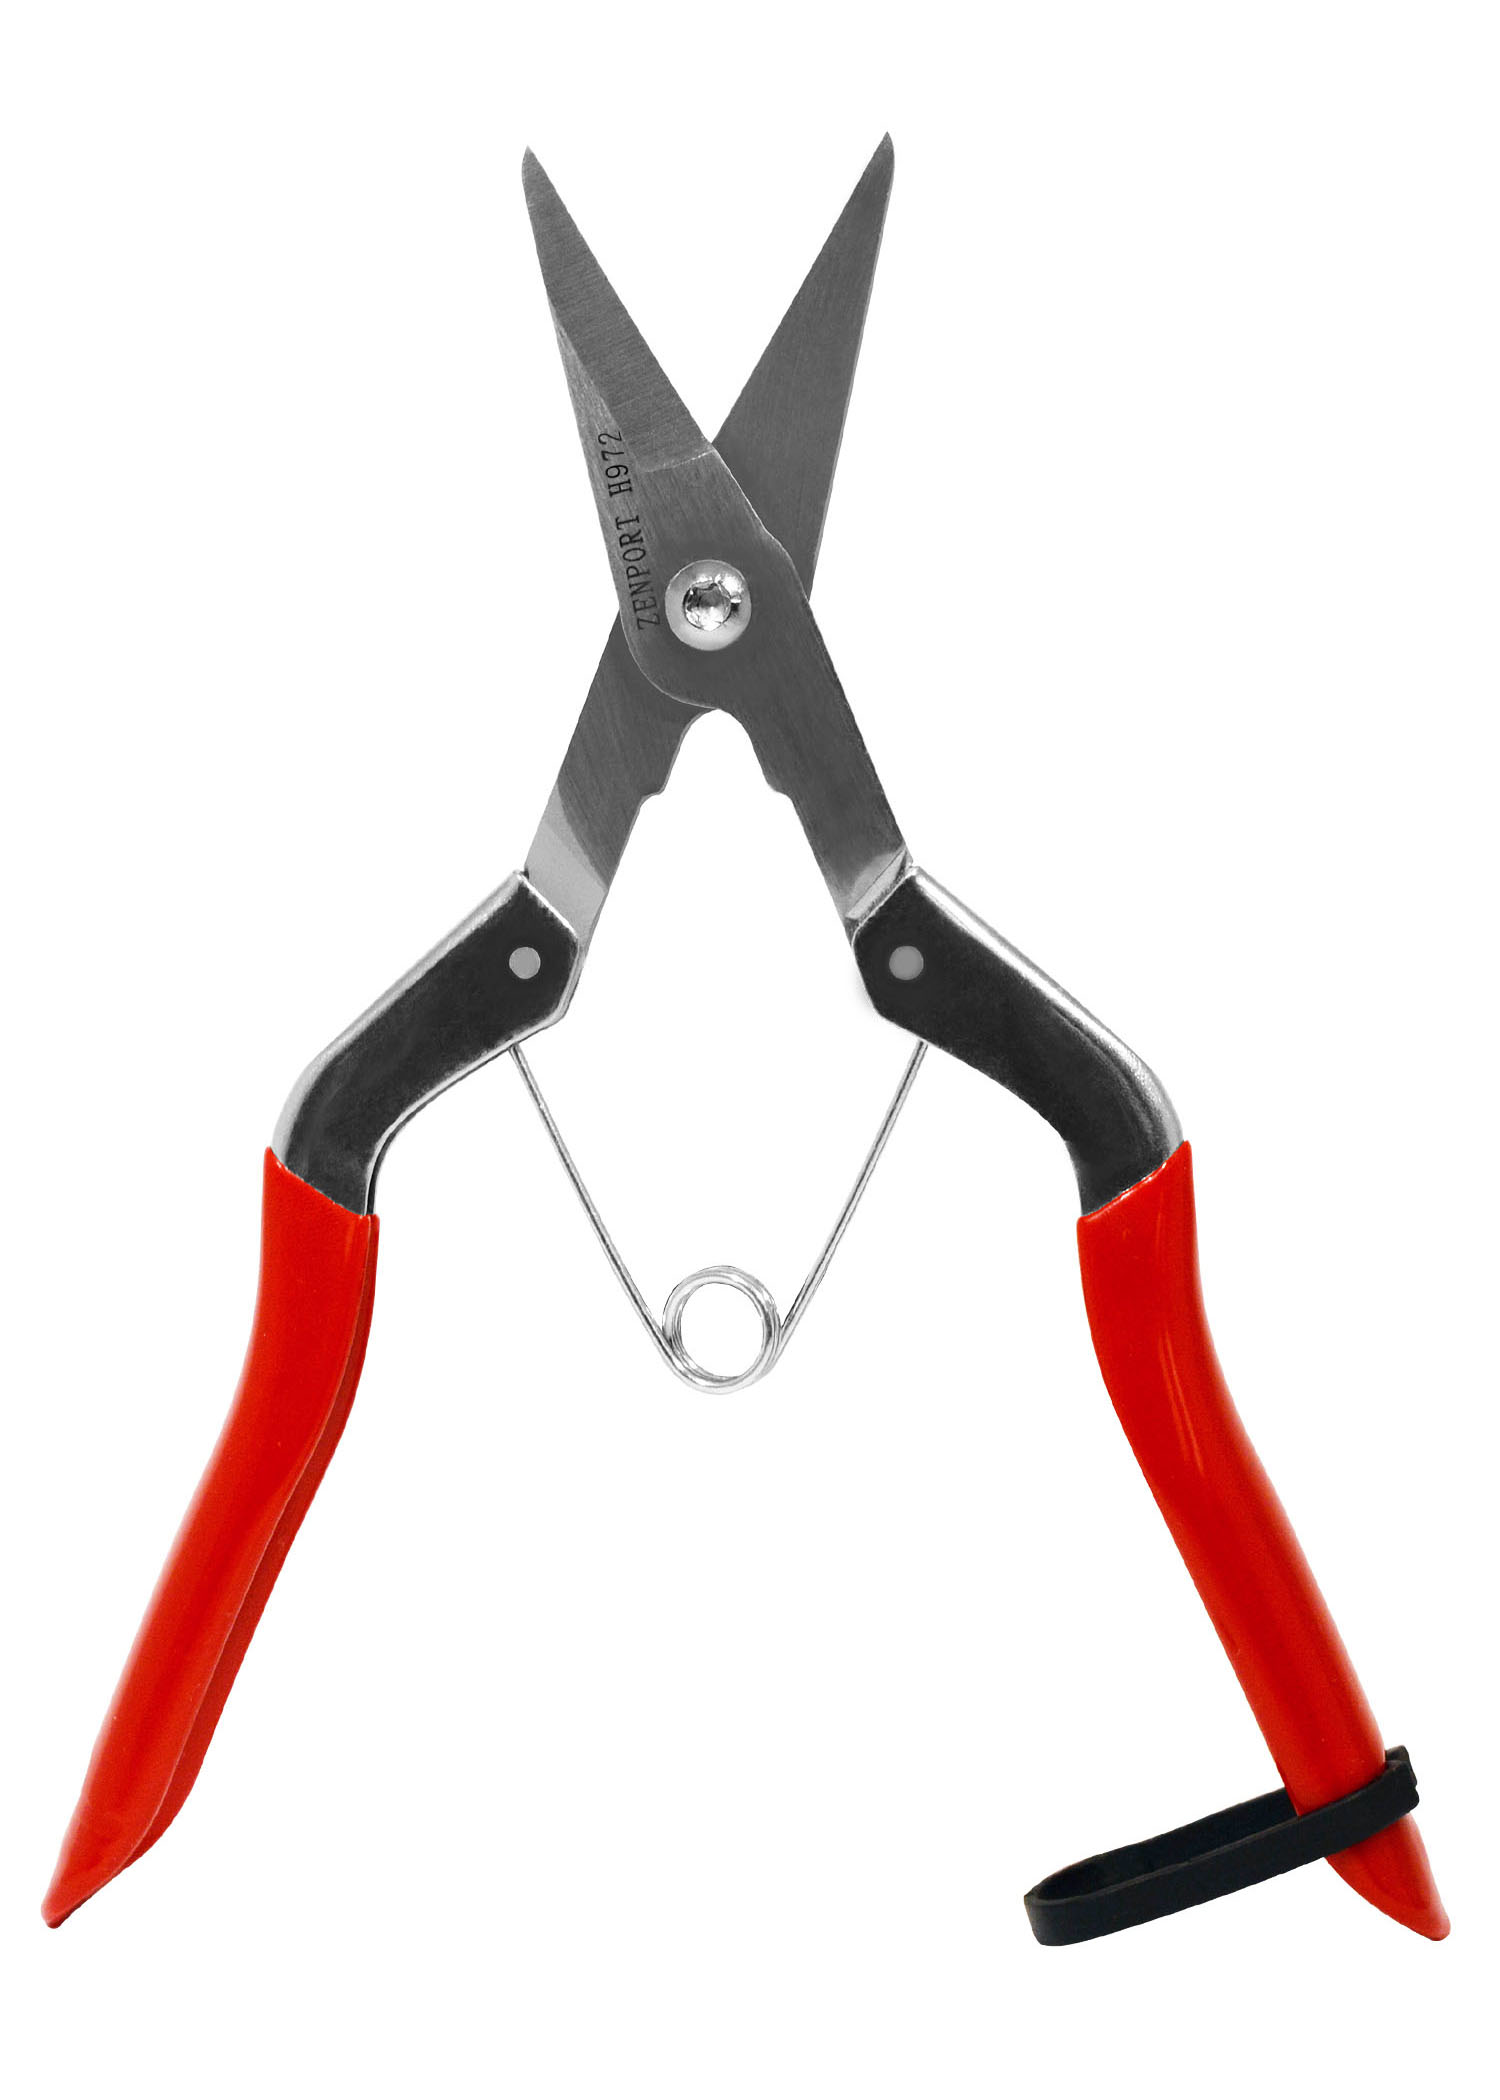 Zenport Shears H972 Long Deluxe Thinning Pomelo Shear 210cm 8.25-Inch Long with Wishbone Spring